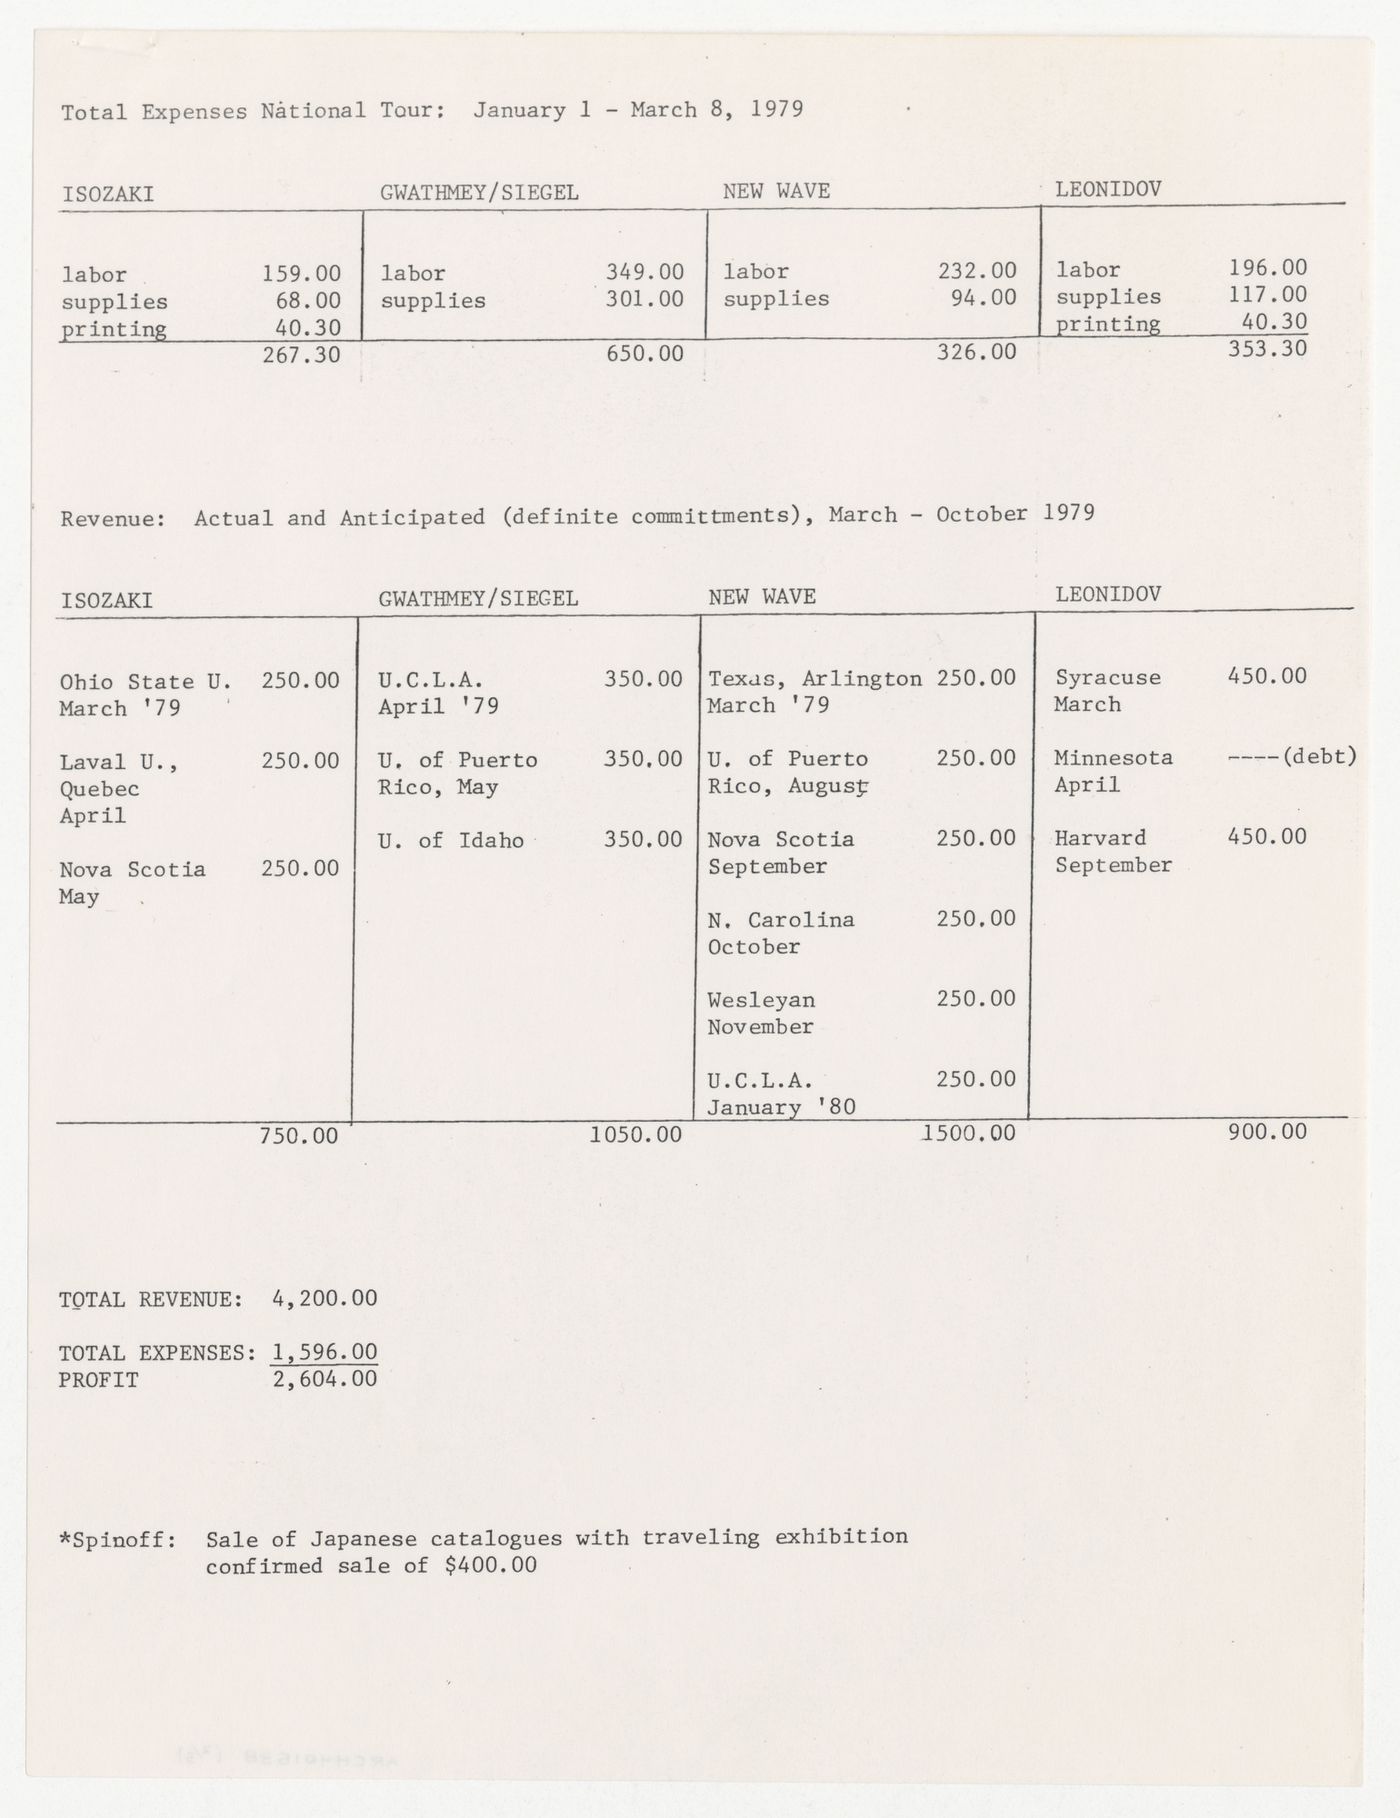 National Tour budget and proposed exhibition schedule for 1971-1980 with cover note